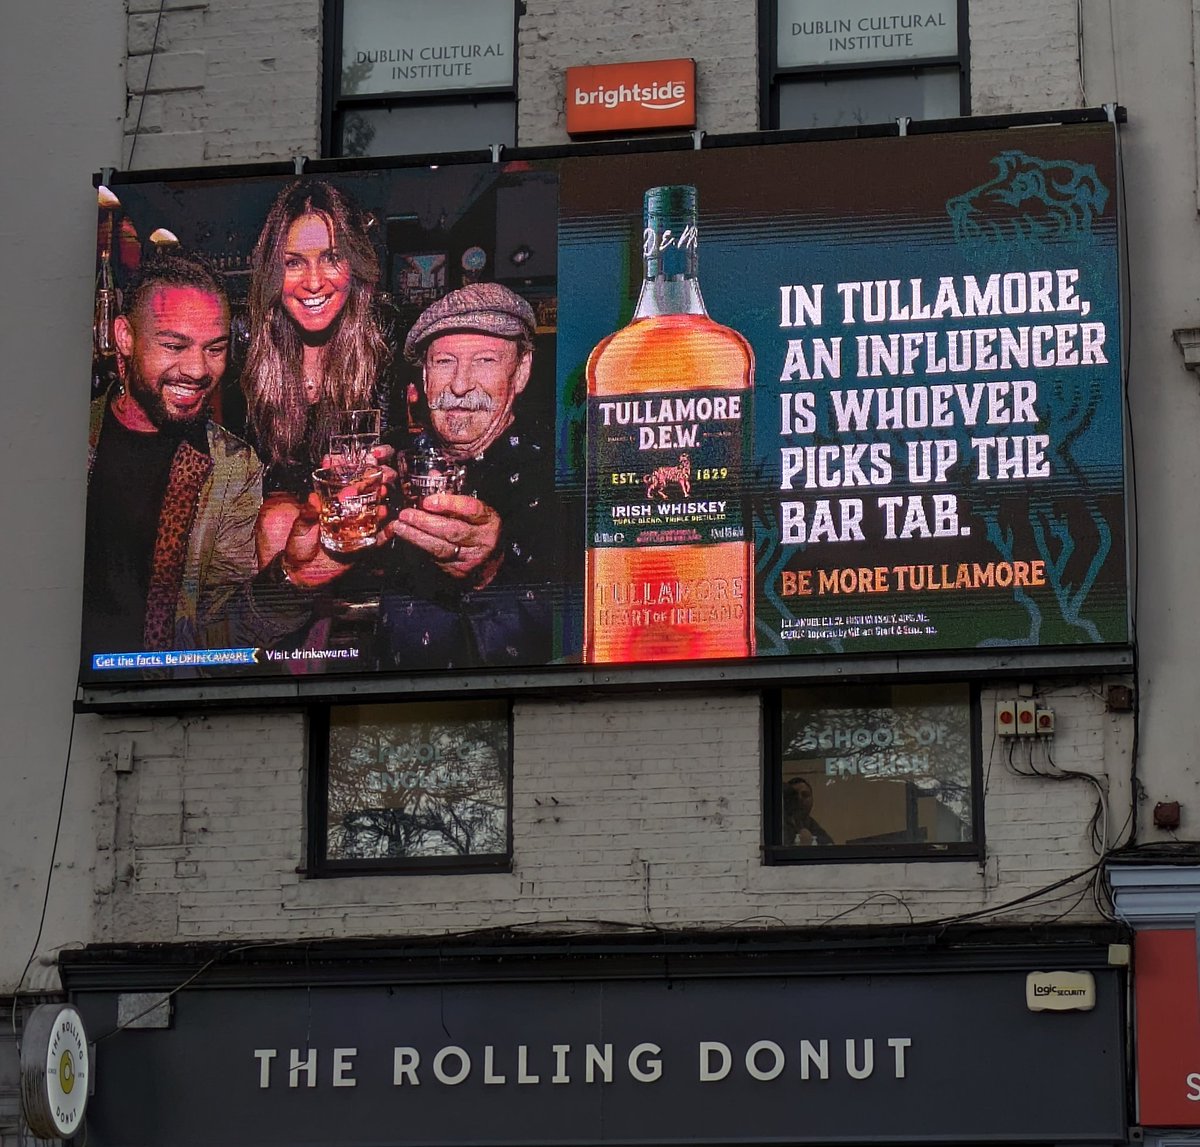 Love the location of the @TullamoreDEW billboard in Dublin...Irish Whiskey and Donuts, the perfect combination!! 🥃🍩😋 #tullamoredew #irishwhiskey #rollingdonut